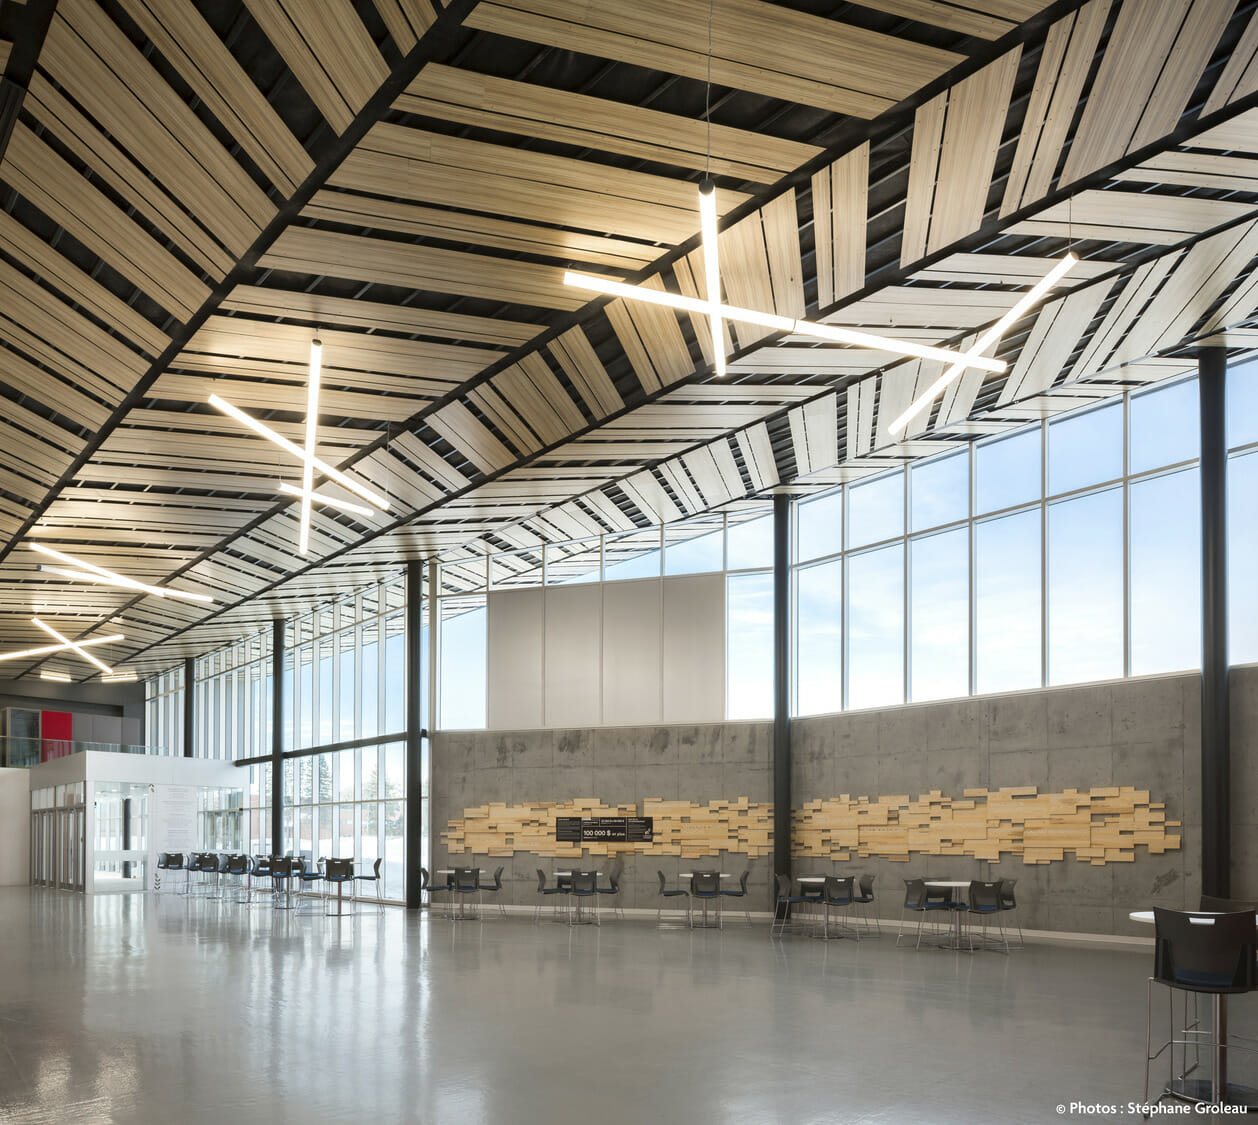 The interior of an airport with a wooden ceiling.